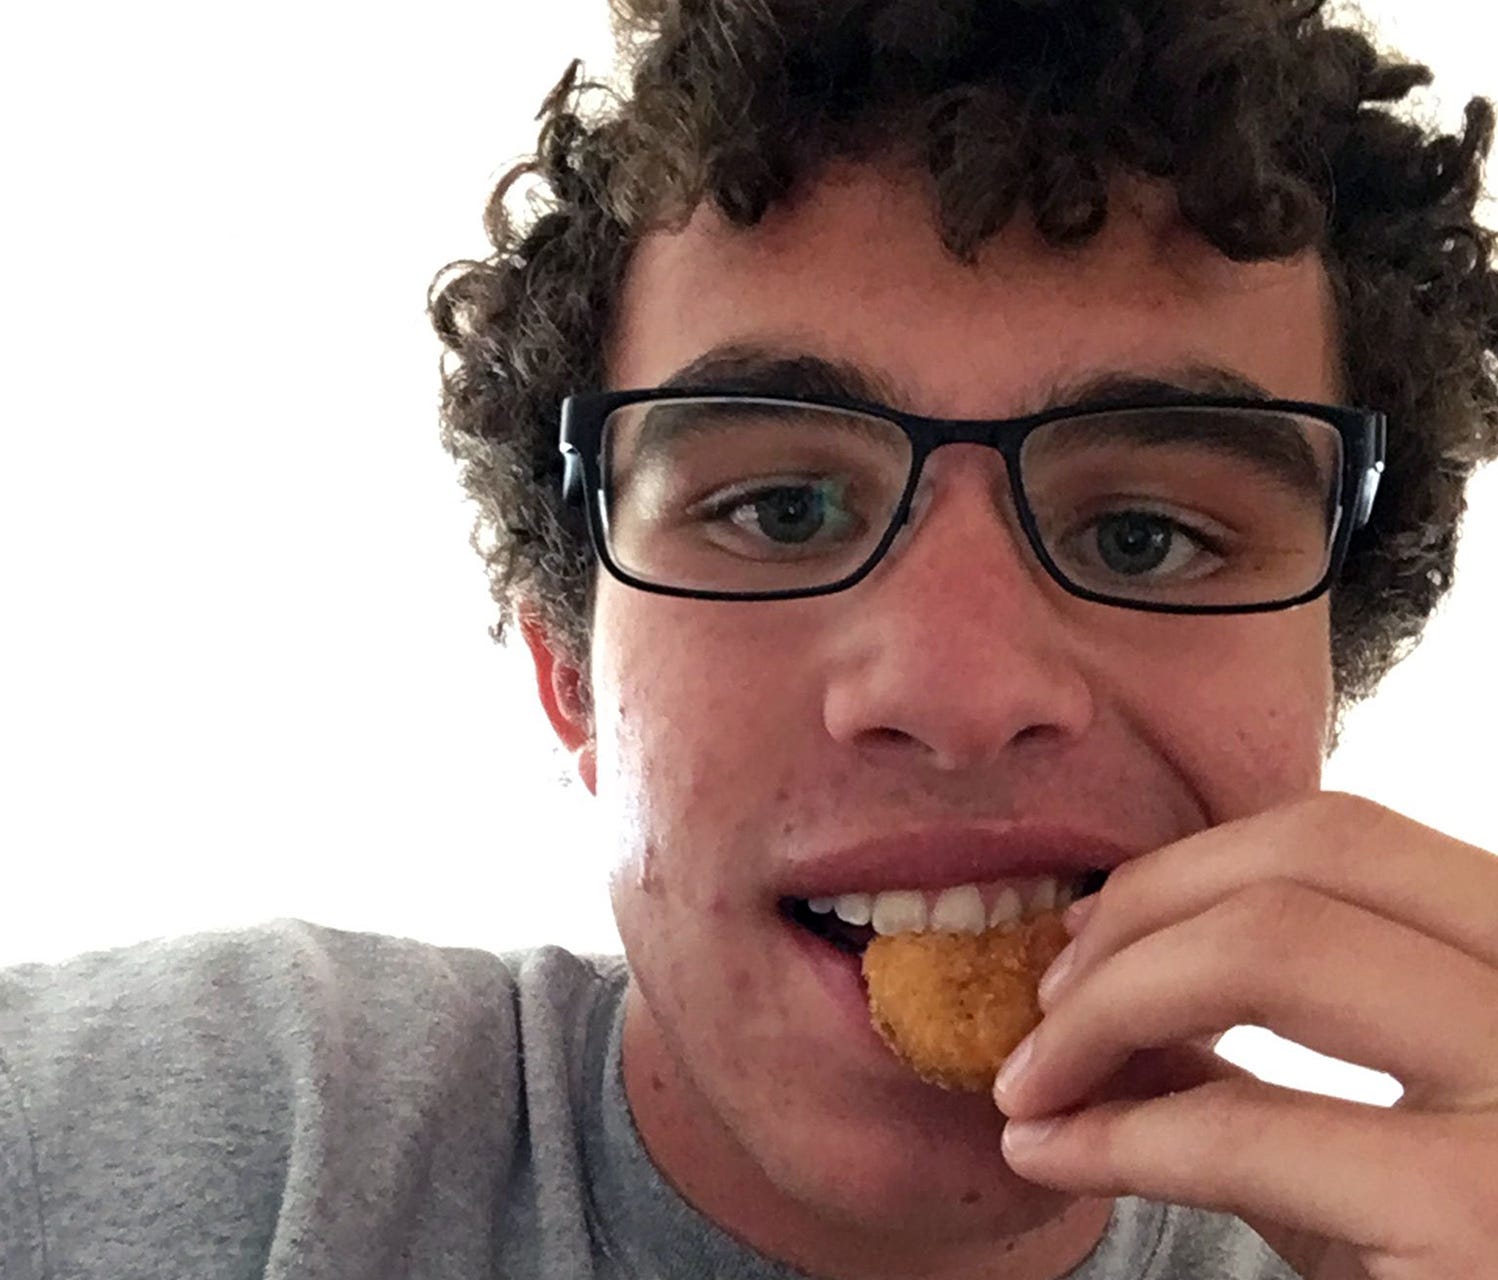 Carter Wilkerson, 16, of Reno took on a Wendy's challenge to get 18 million retweets for free chicken nuggets for a year. On Tuesday, May 9, 2017, he beat the record set by Ellen DeGeneres. He will get the free nuggets.